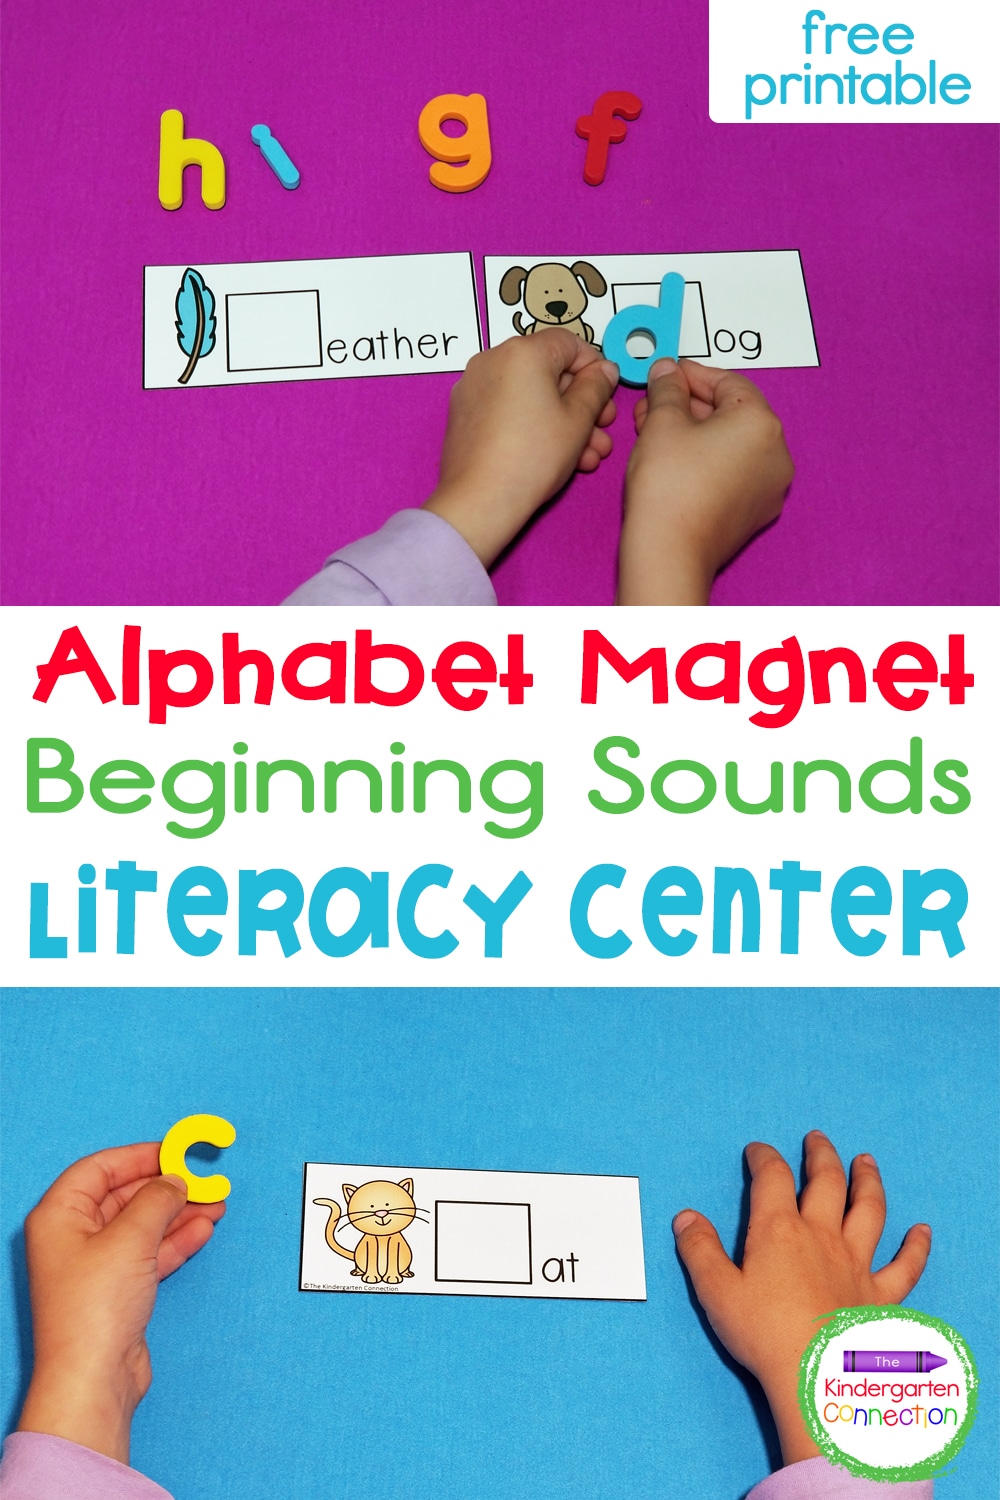 This free Alphabet Magnet Beginning Sounds Activity is great for Pre-K, Kindergarten, or early 1st graders who are working on letter sounds!